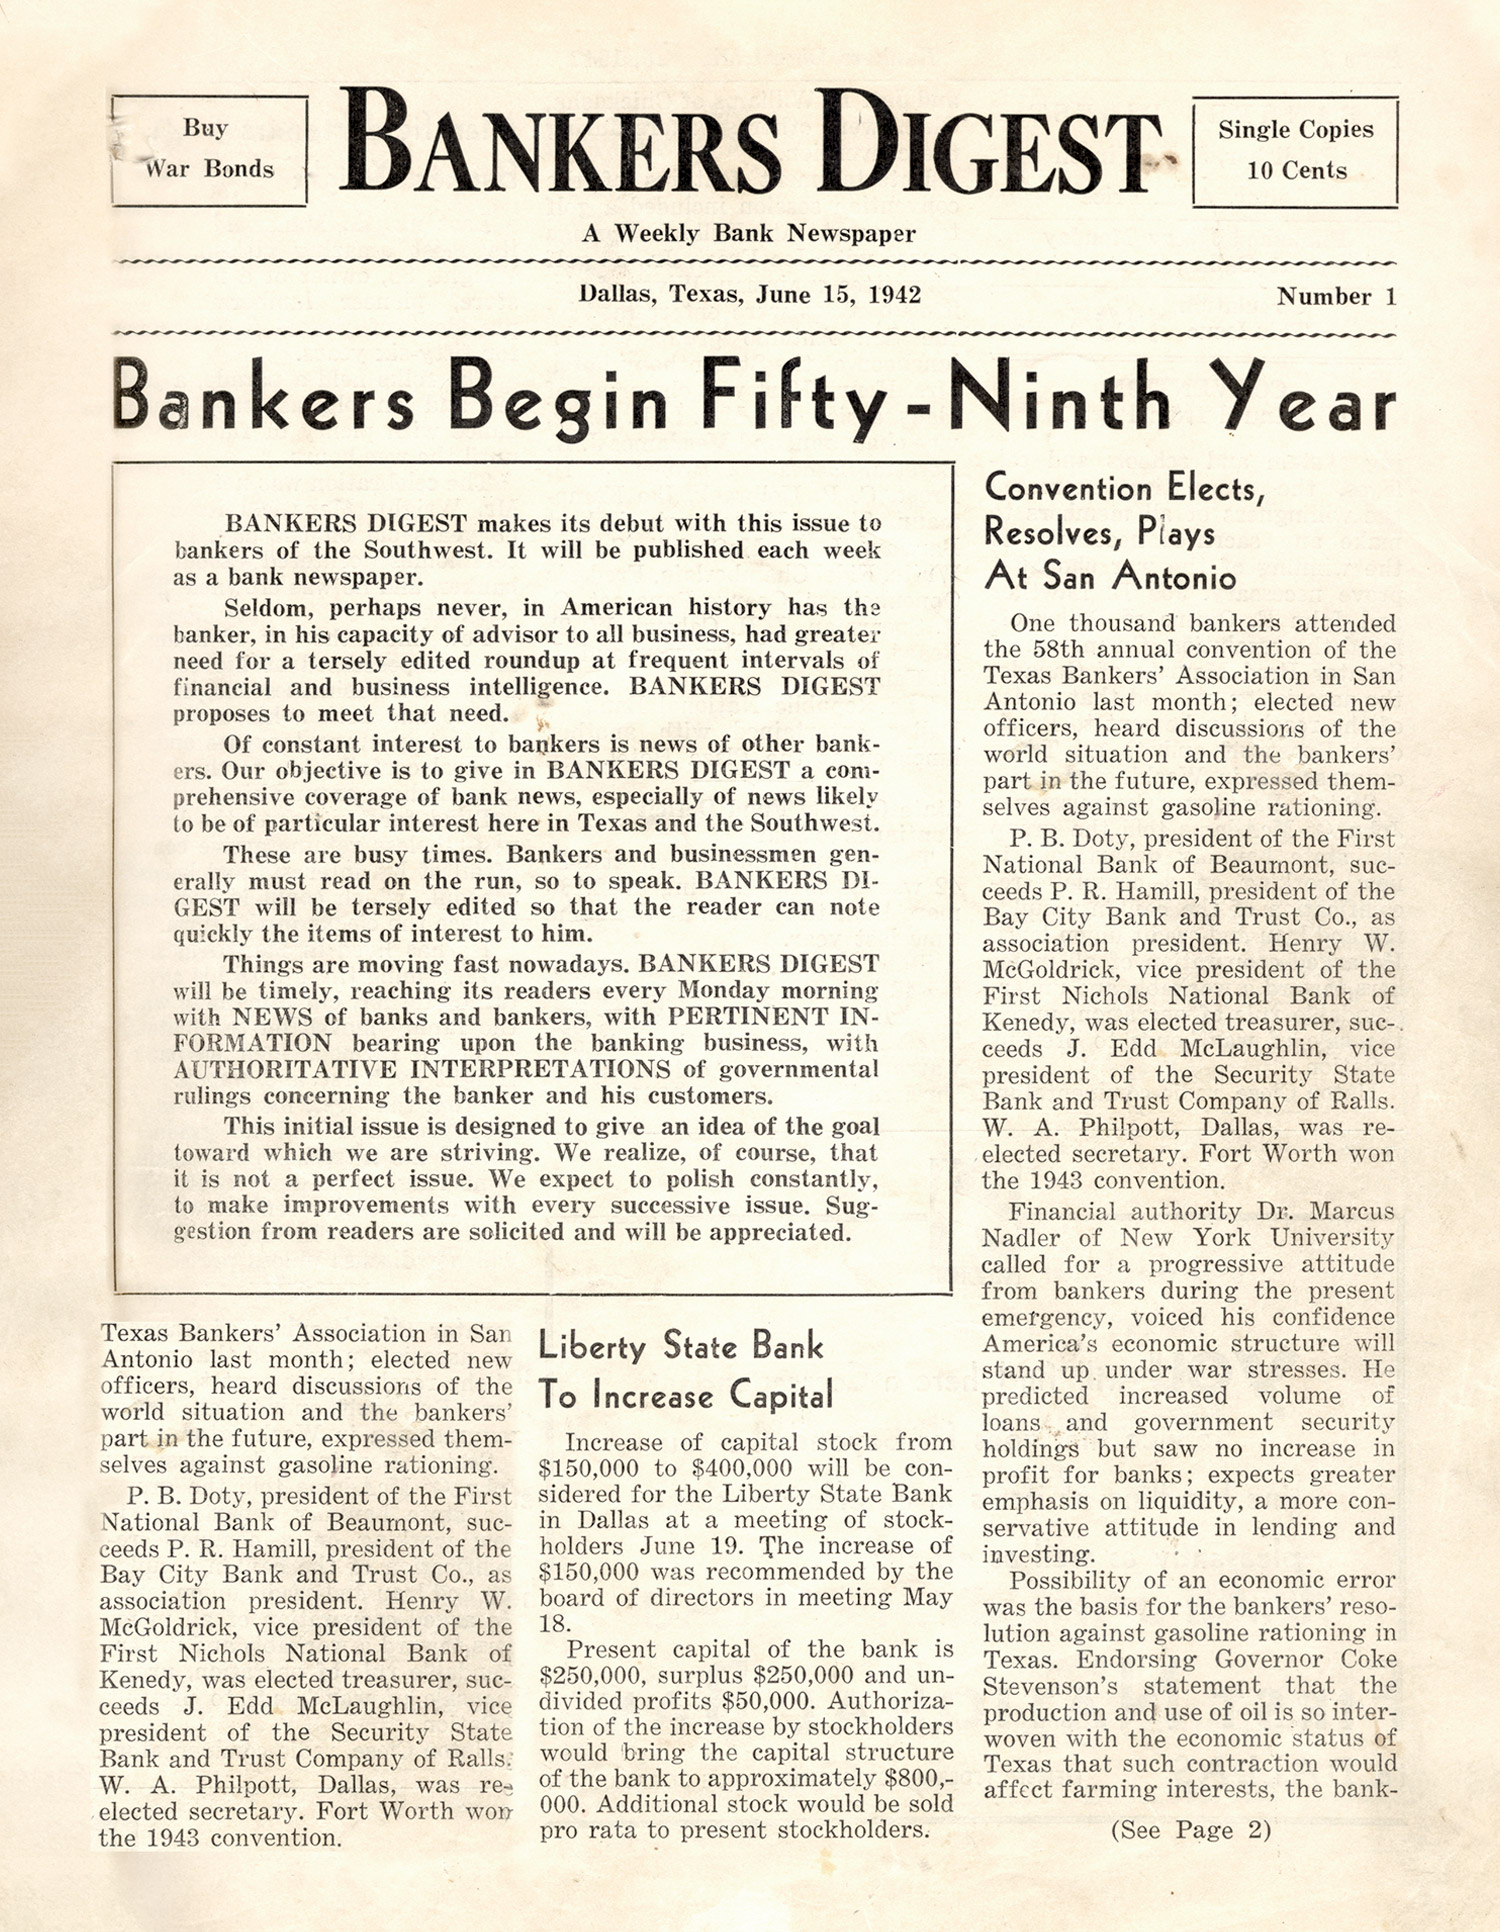 Bankers Digest Issue 1